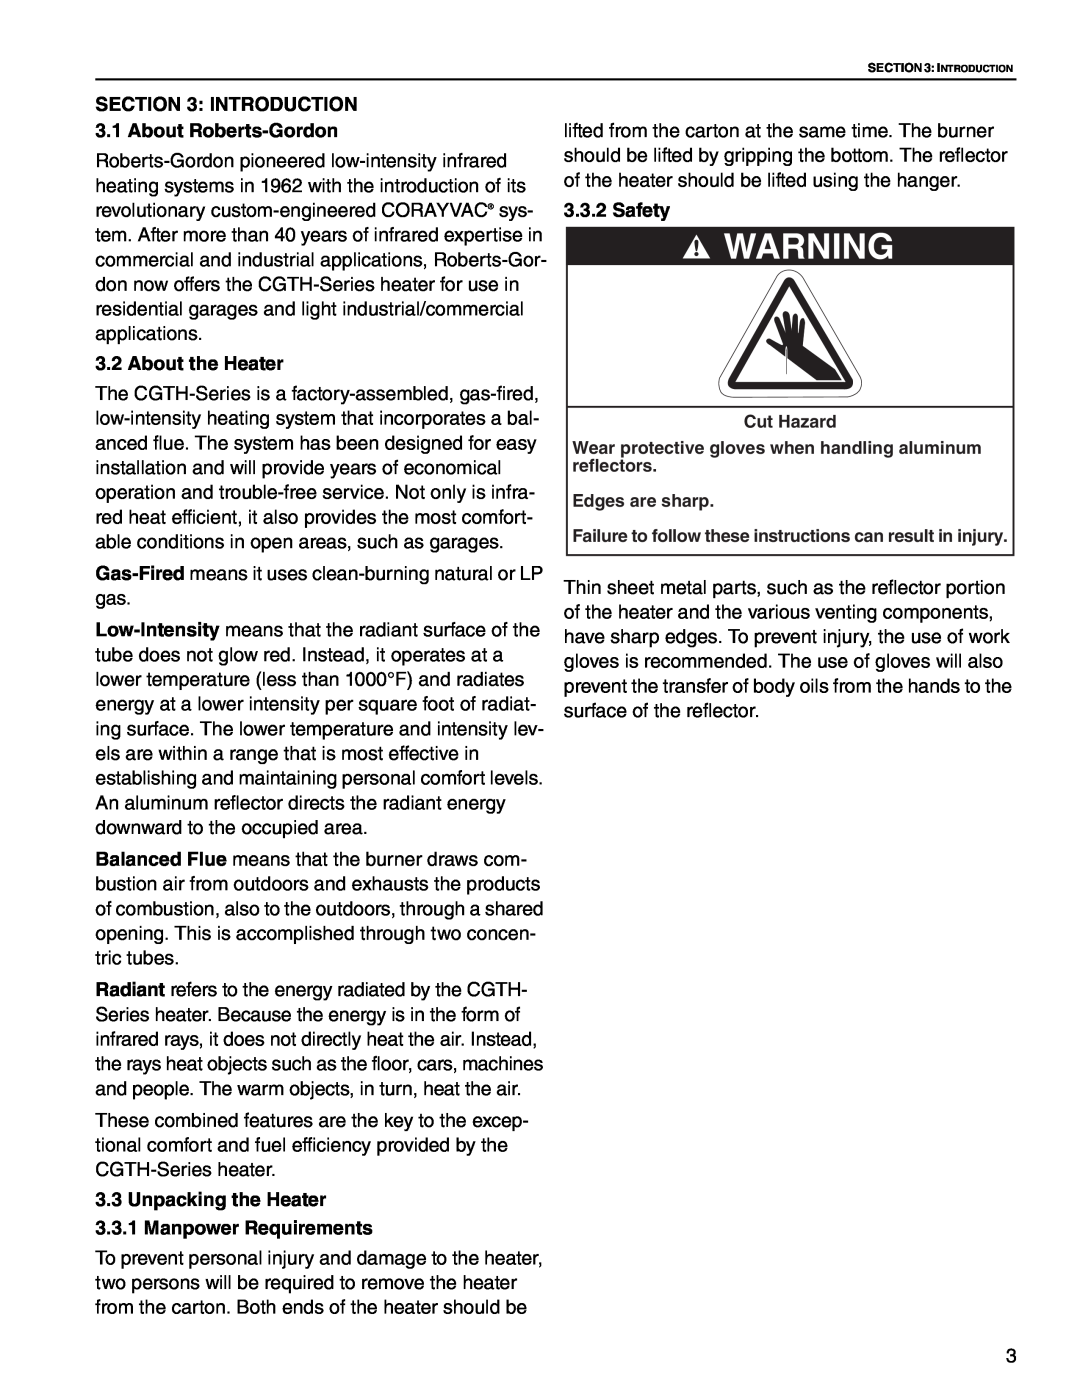 Roberts Gorden CGTH-30, CGTH-50, CGTH-40 service manual About the Heater, Safety 